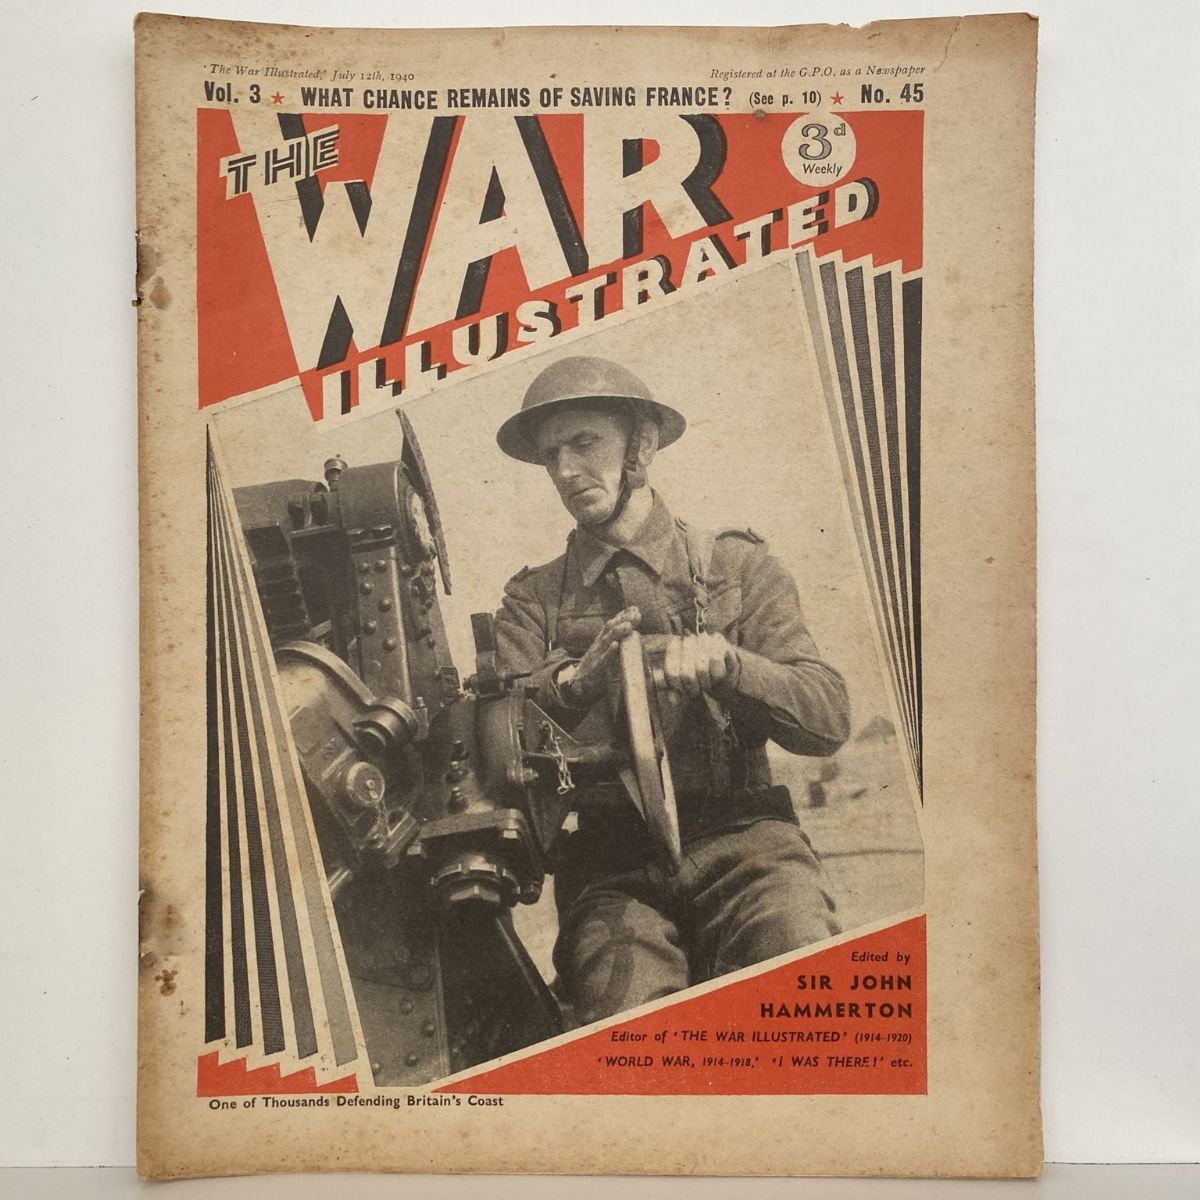 THE WAR ILLUSTRATED - Vol 3, No 45, 12th July 1940